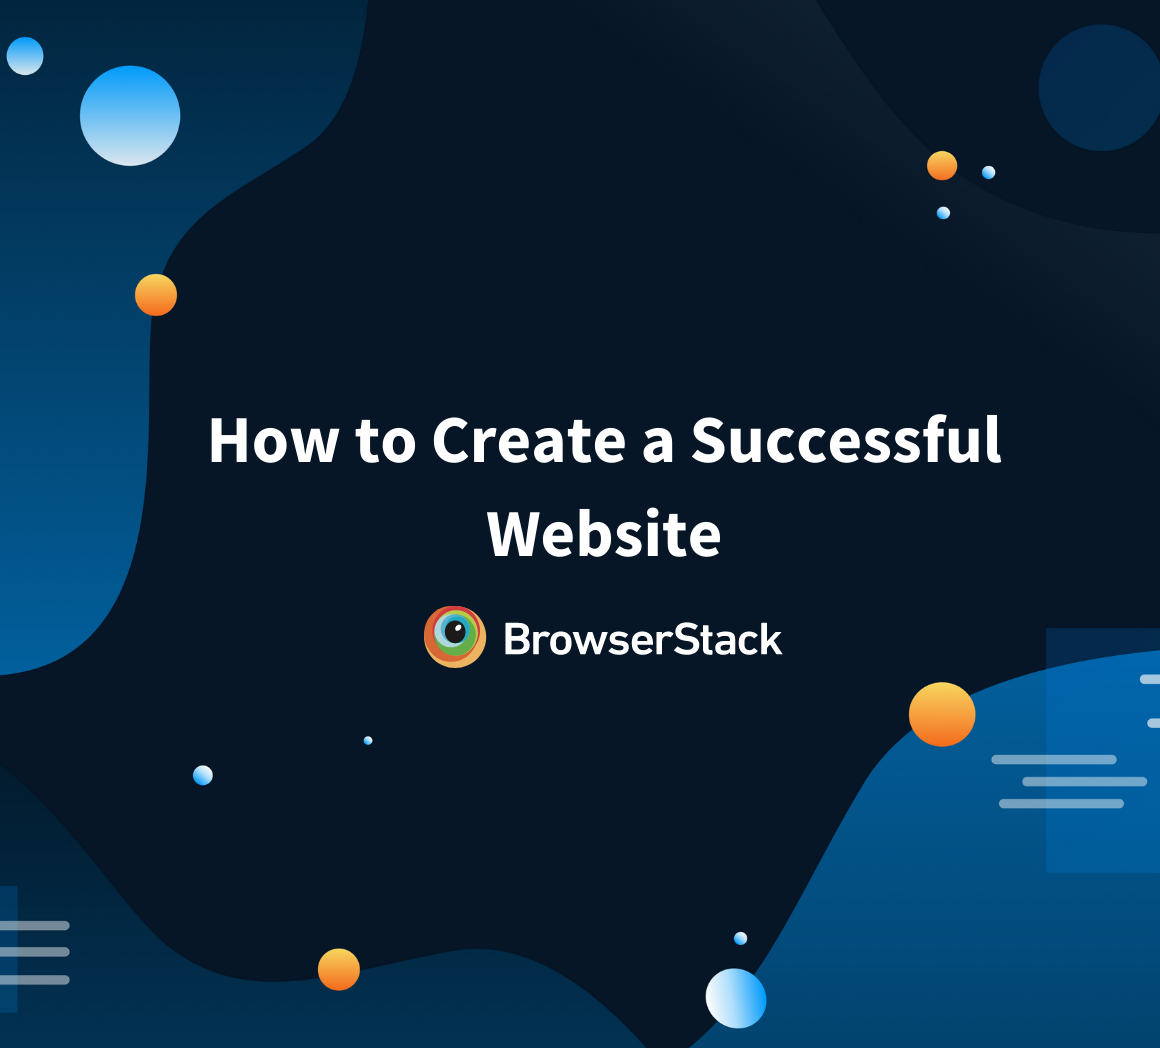 Tips to create a successful website